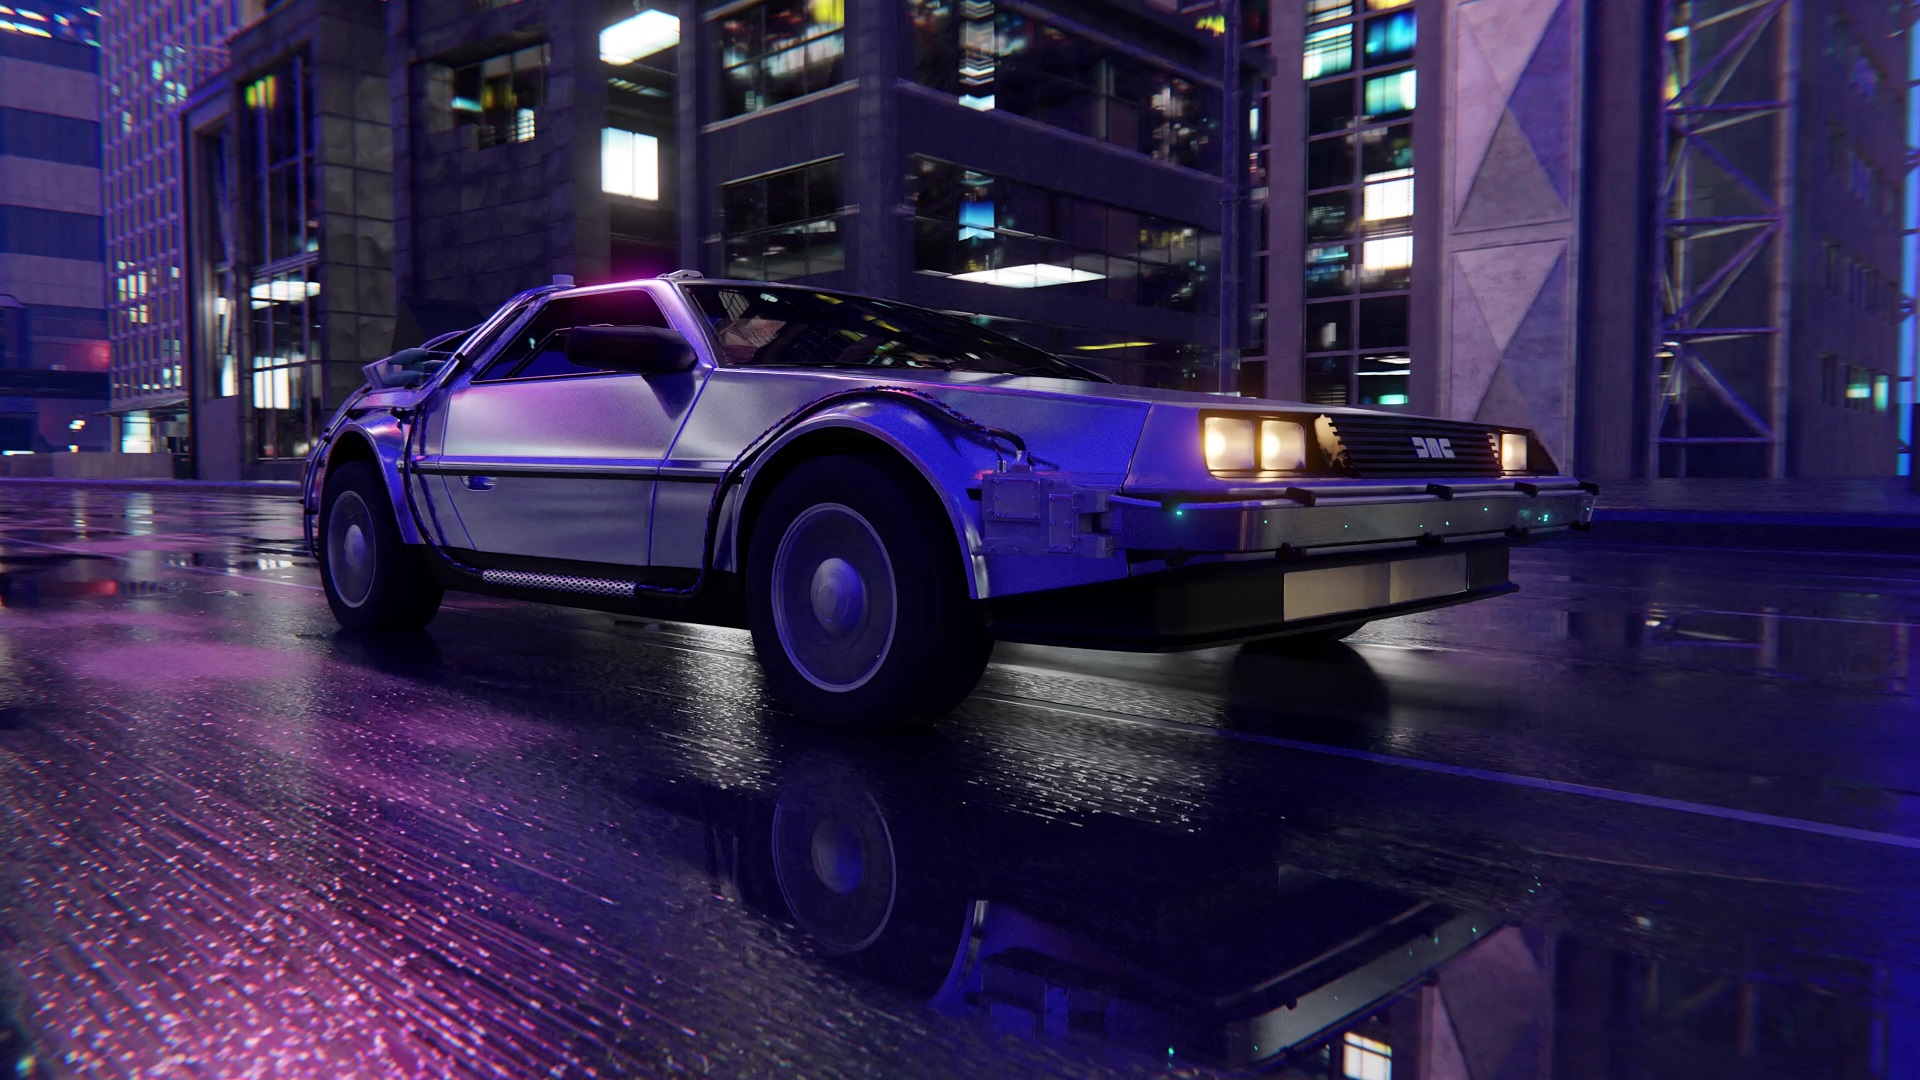 MMD Homura Back to the Future Delorean by Animexcel on DeviantArt